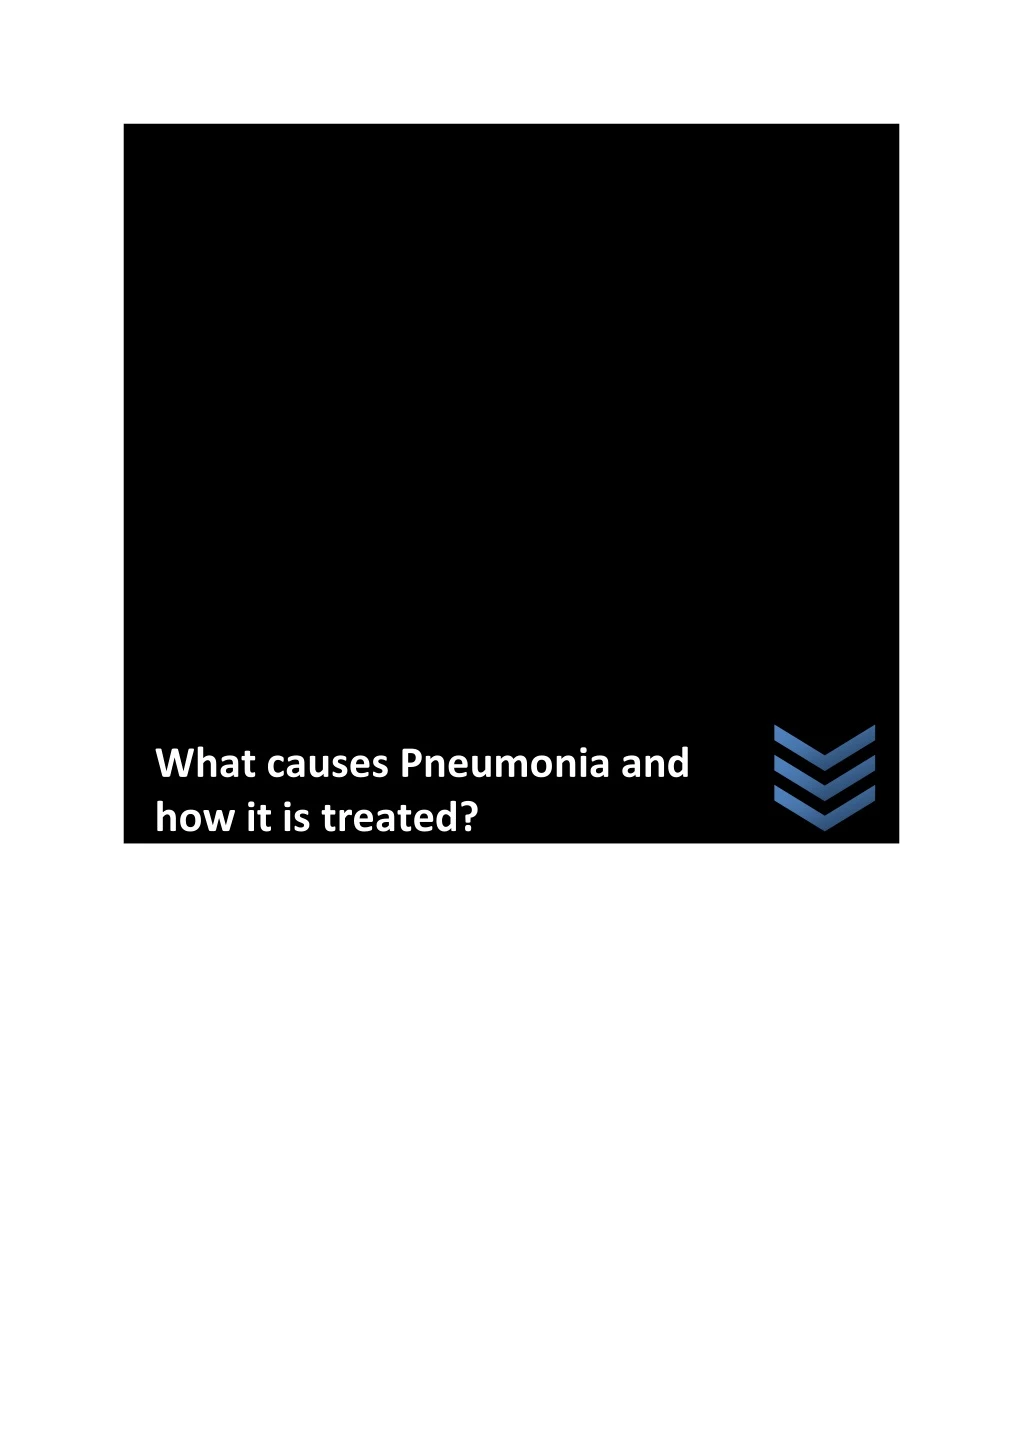 what causes pneumonia and how it is treated